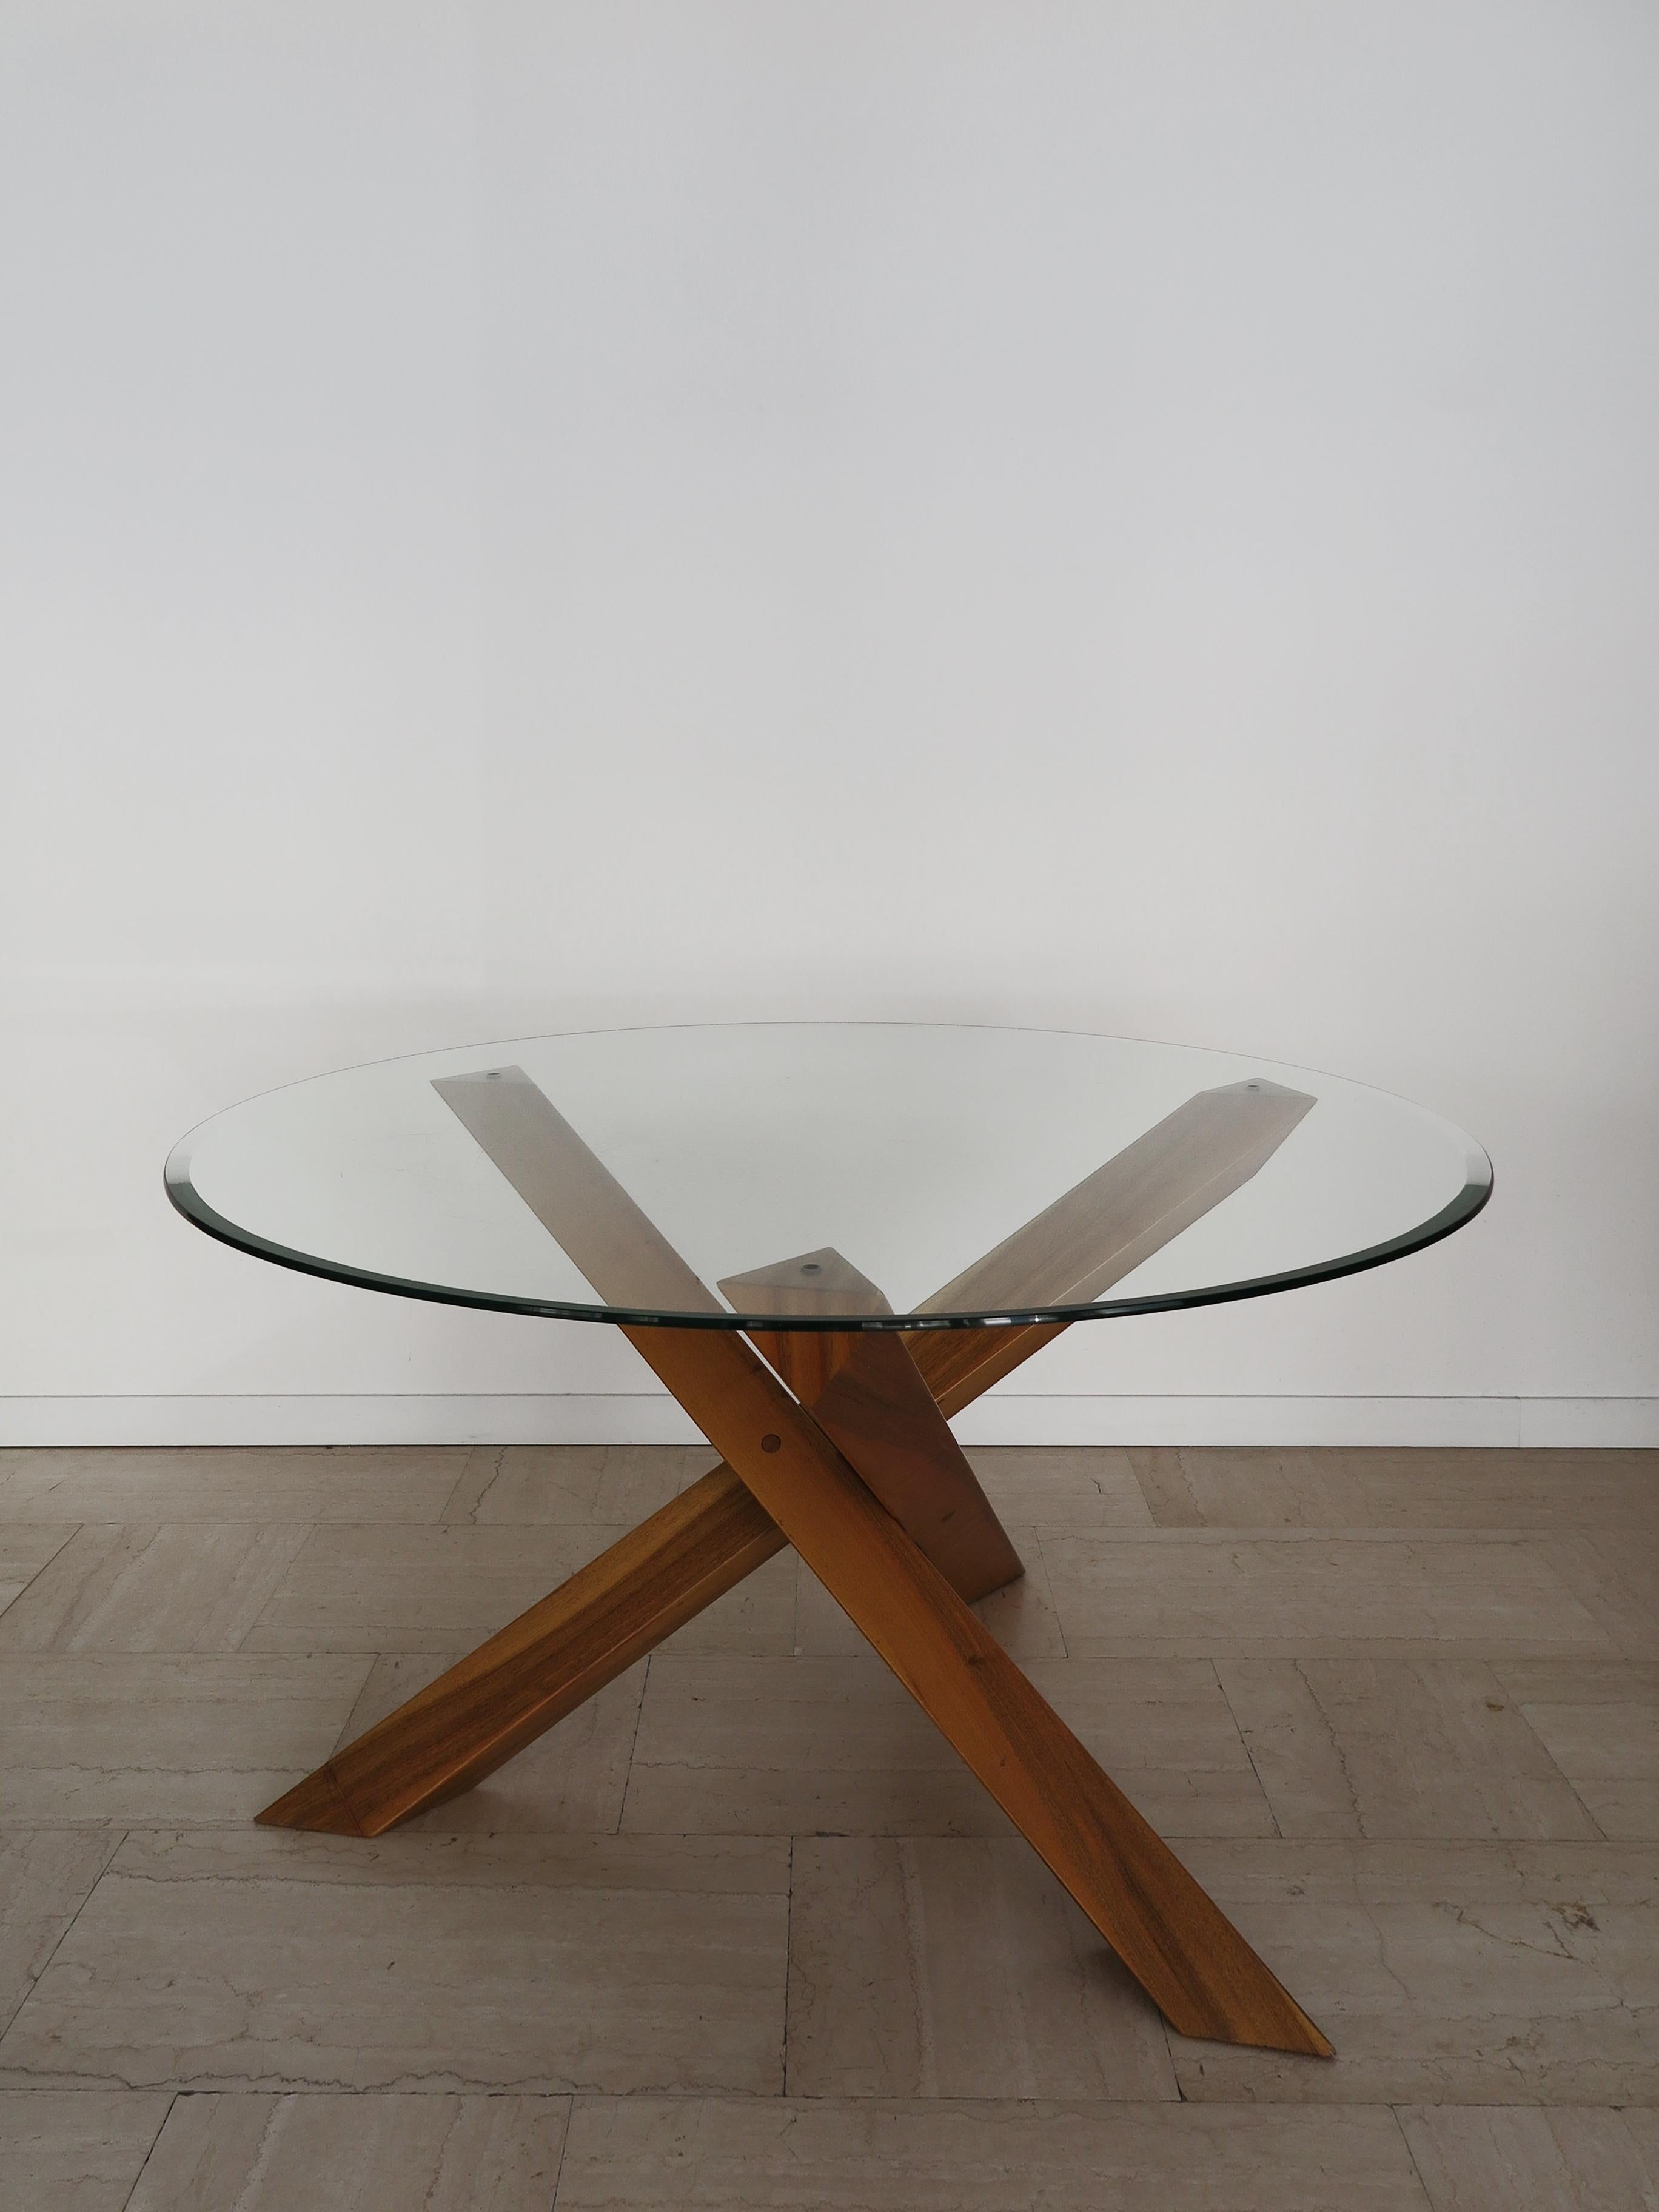 Italian dining table in the style of Mario Bellini for Cassina with glass top with bevelled edge resting on sculptural wooden foot, made in Italy 1980s

Please note that the table is original of the period and this shows normal signs of age and use.